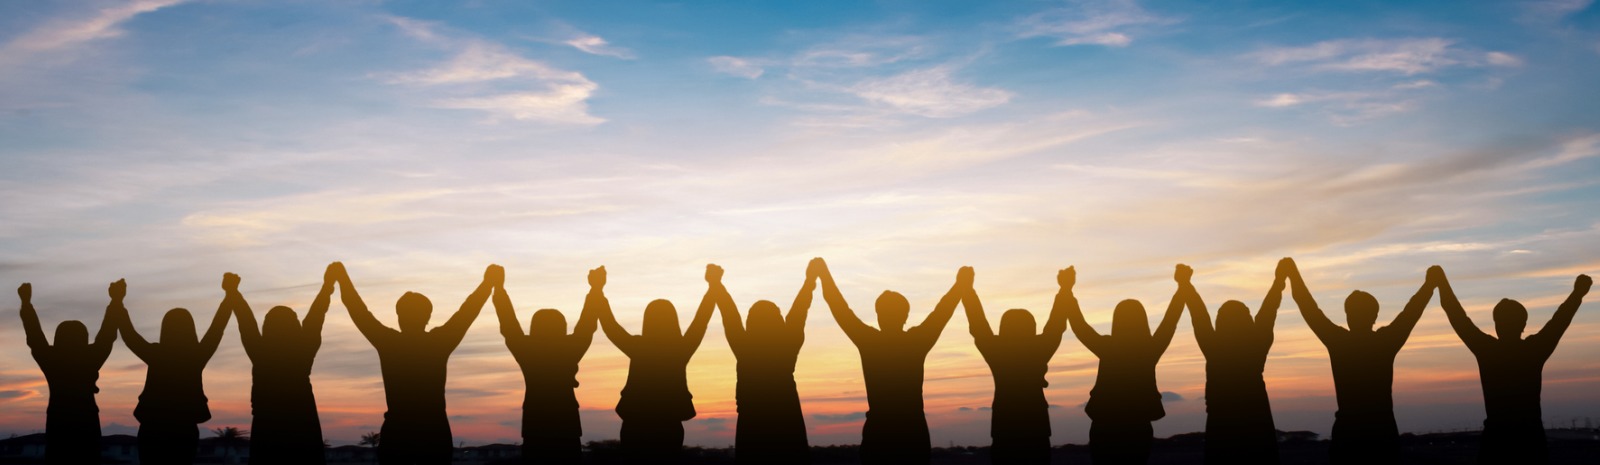 silhouette of several peoples holding raised hands